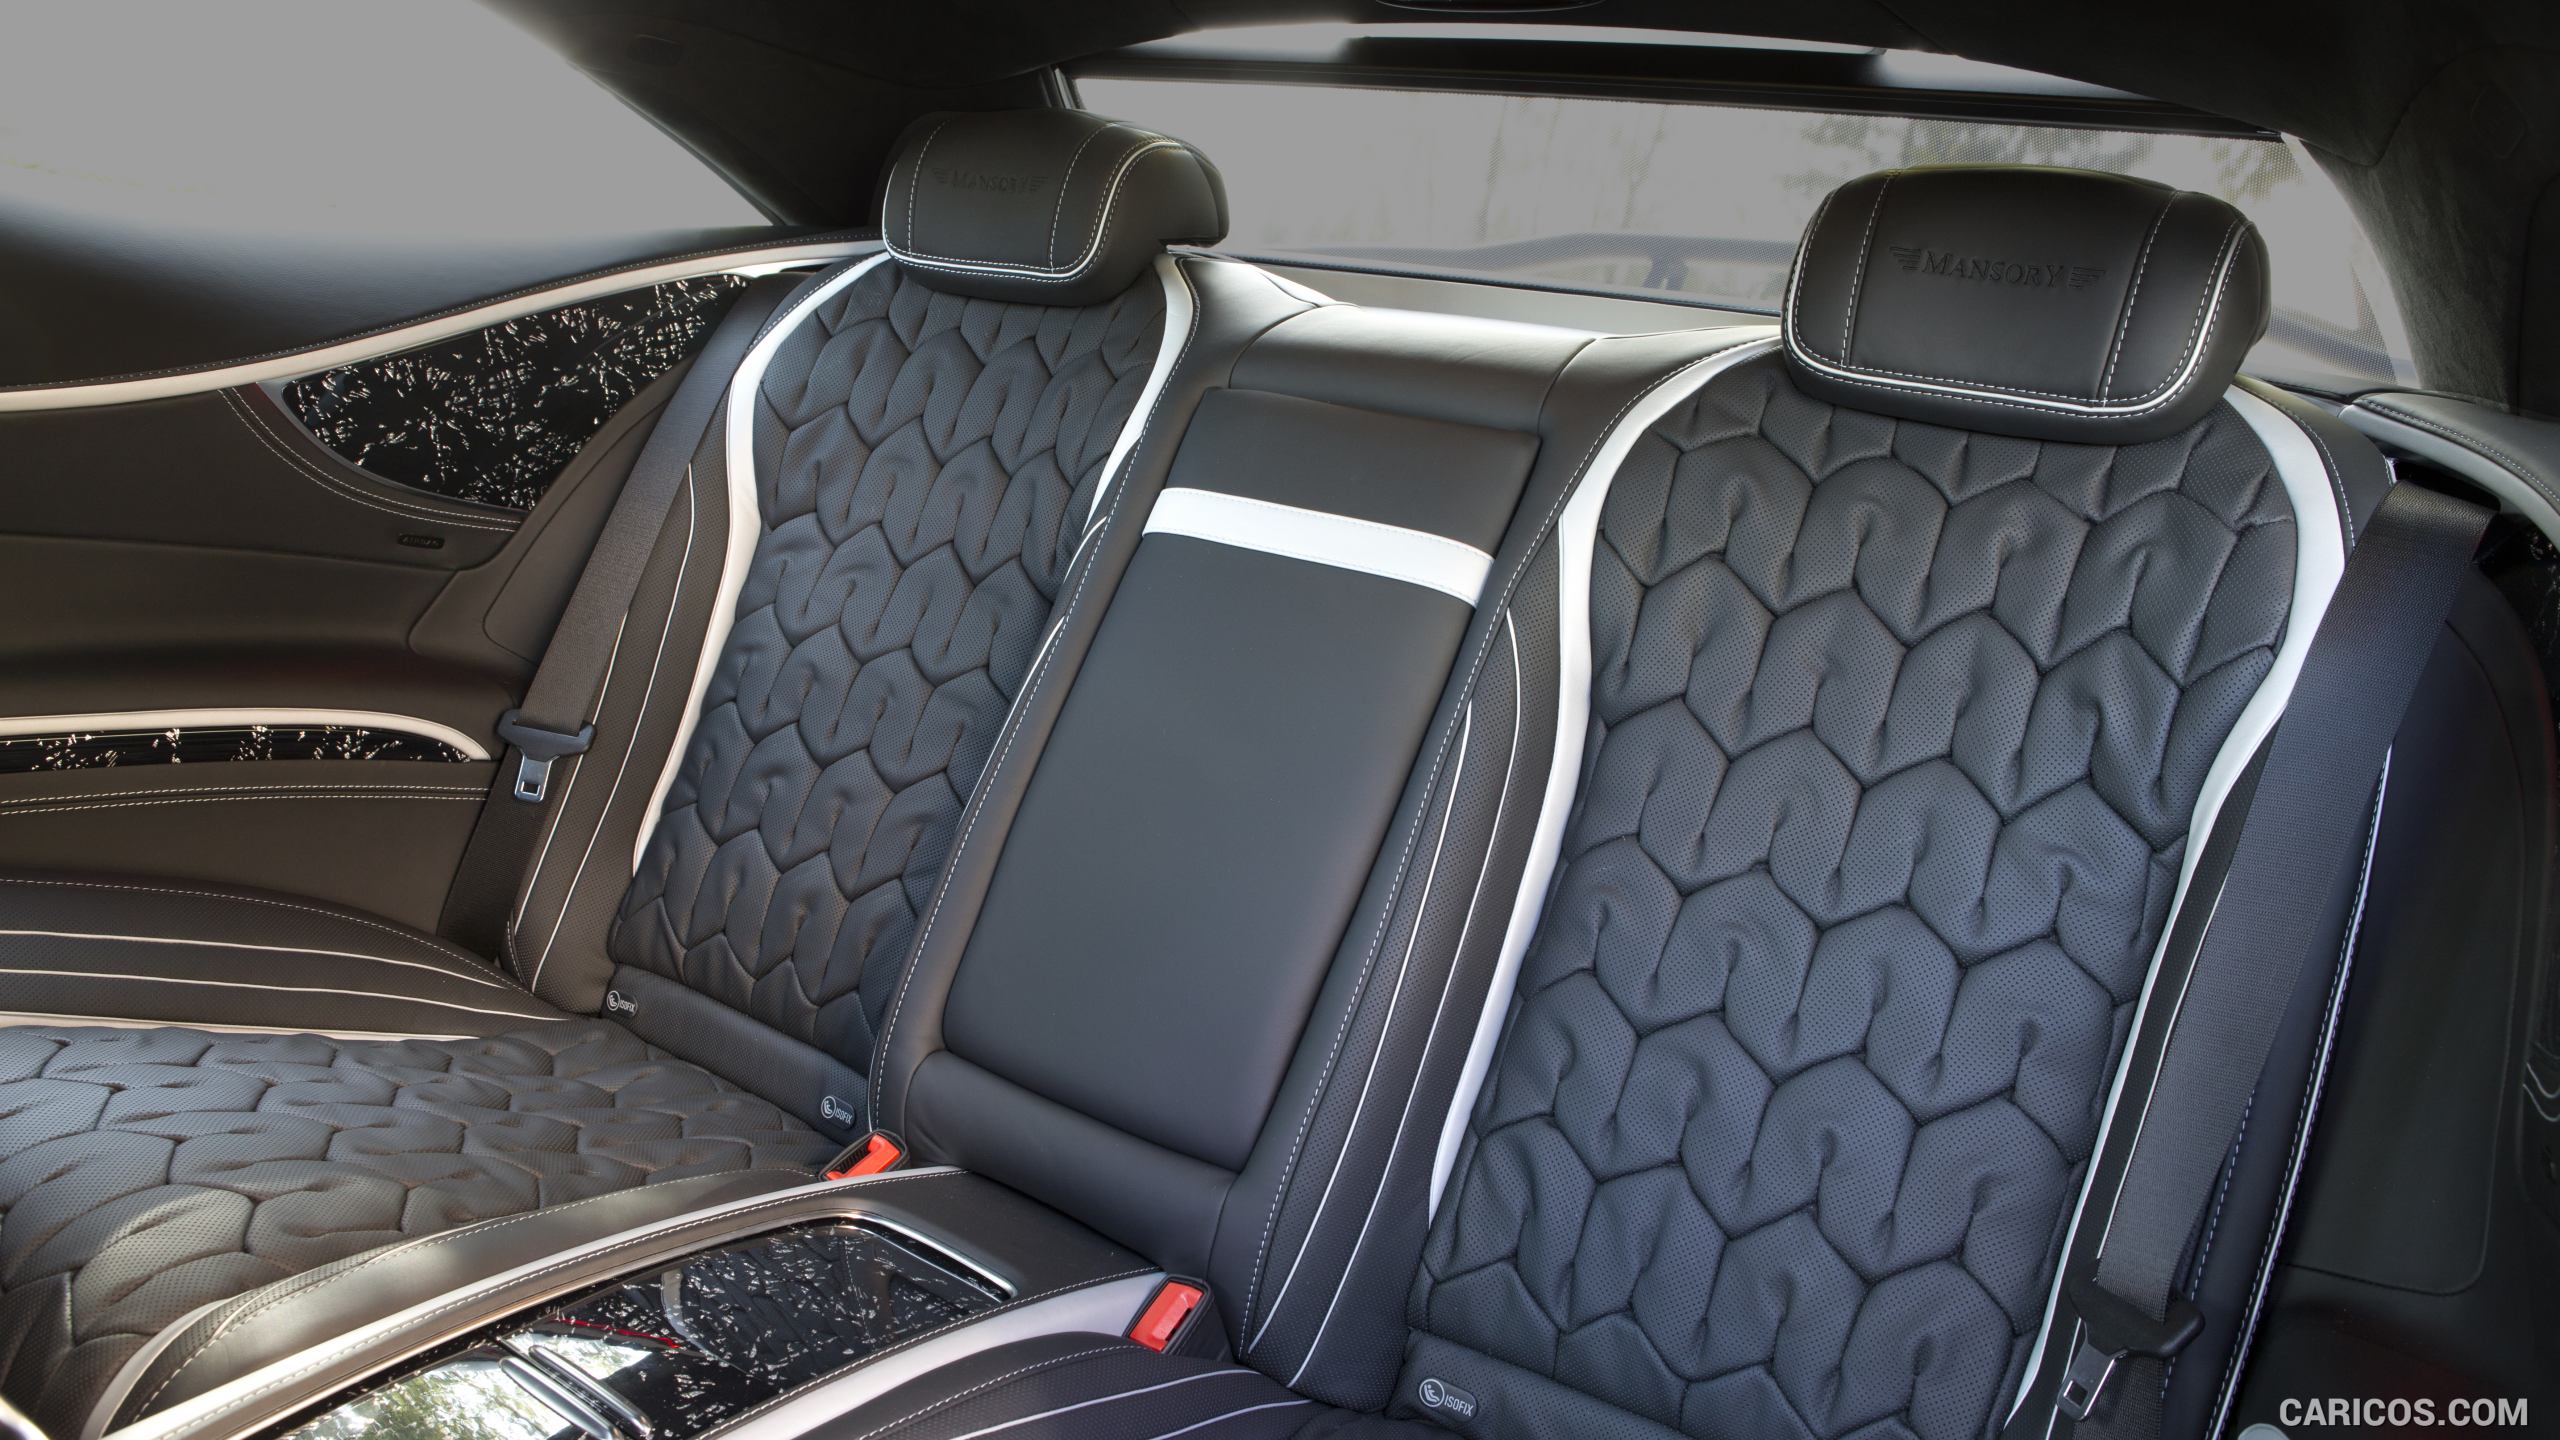 2015 MANSORY Mercedes S63 AMG Coupe Black Edition - Interior Rear Seats, #12 of 12